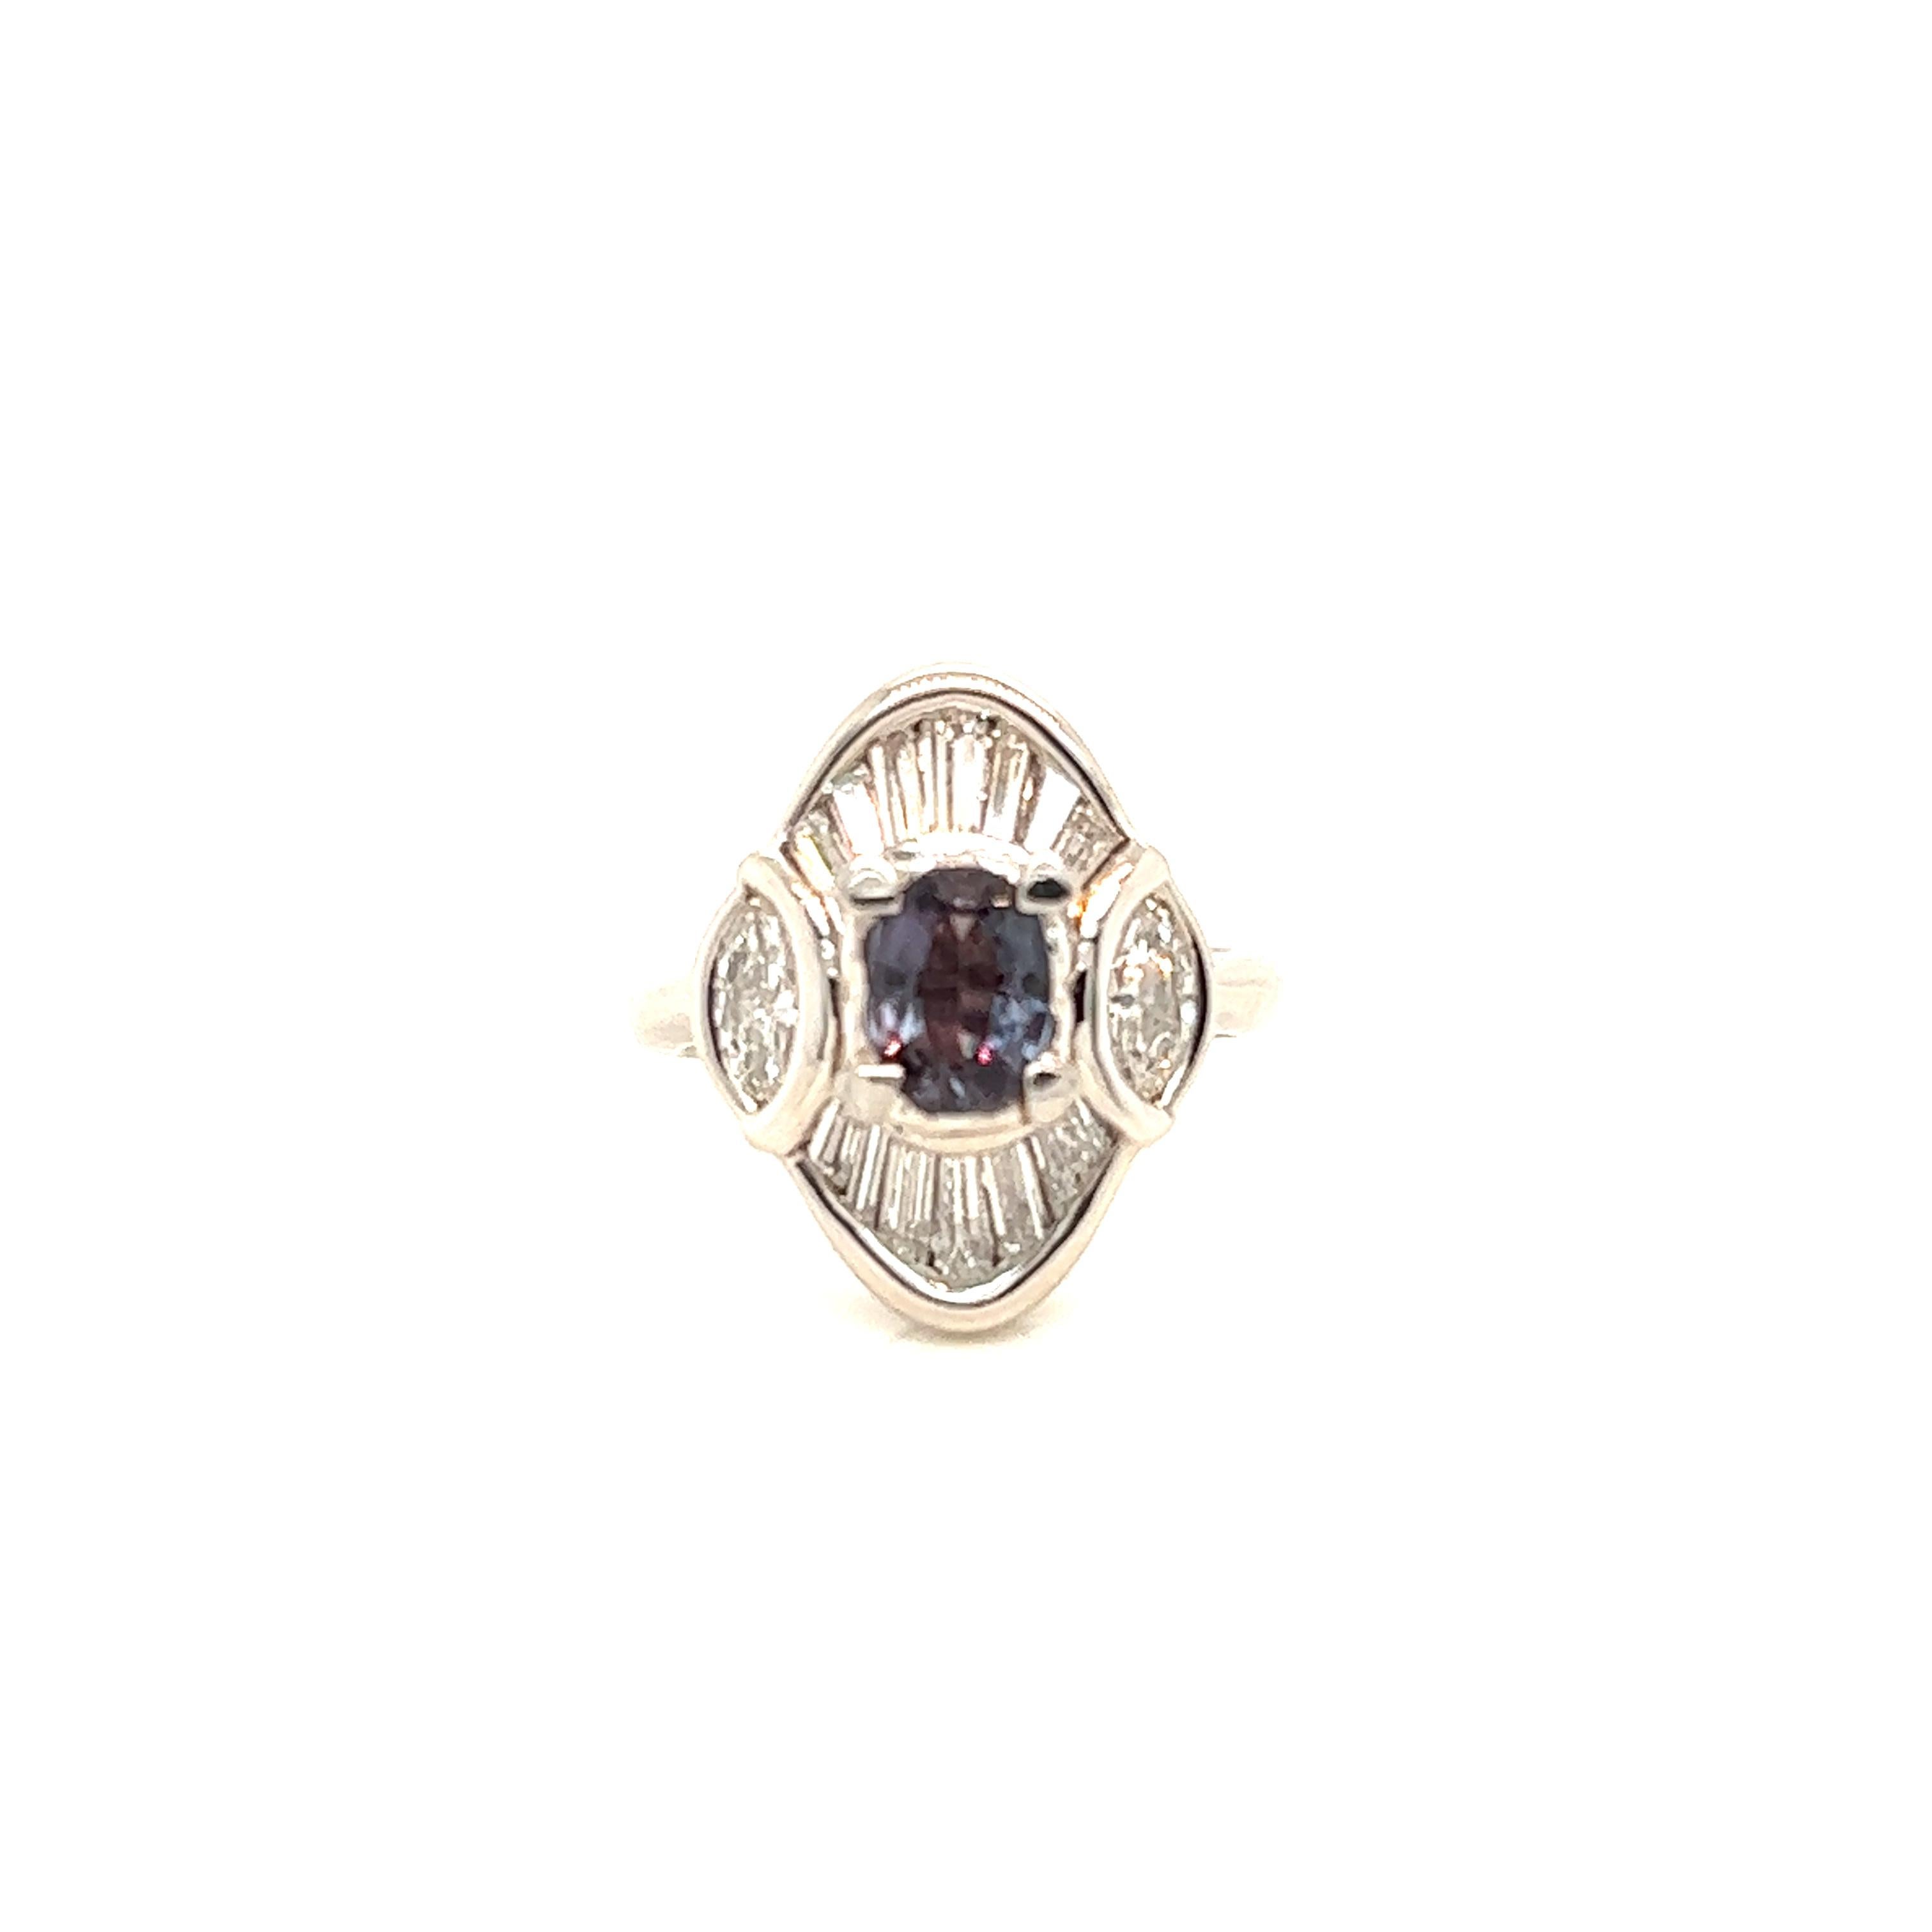 This is a gorgeous natural AAA quality cushion Alexandrite surrounded by dainty diamonds that is set in a vintage platinum setting. This ring features a natural 0.84 carat cushion alexandrite that is surrounded by brilliant white diamonds. The ring